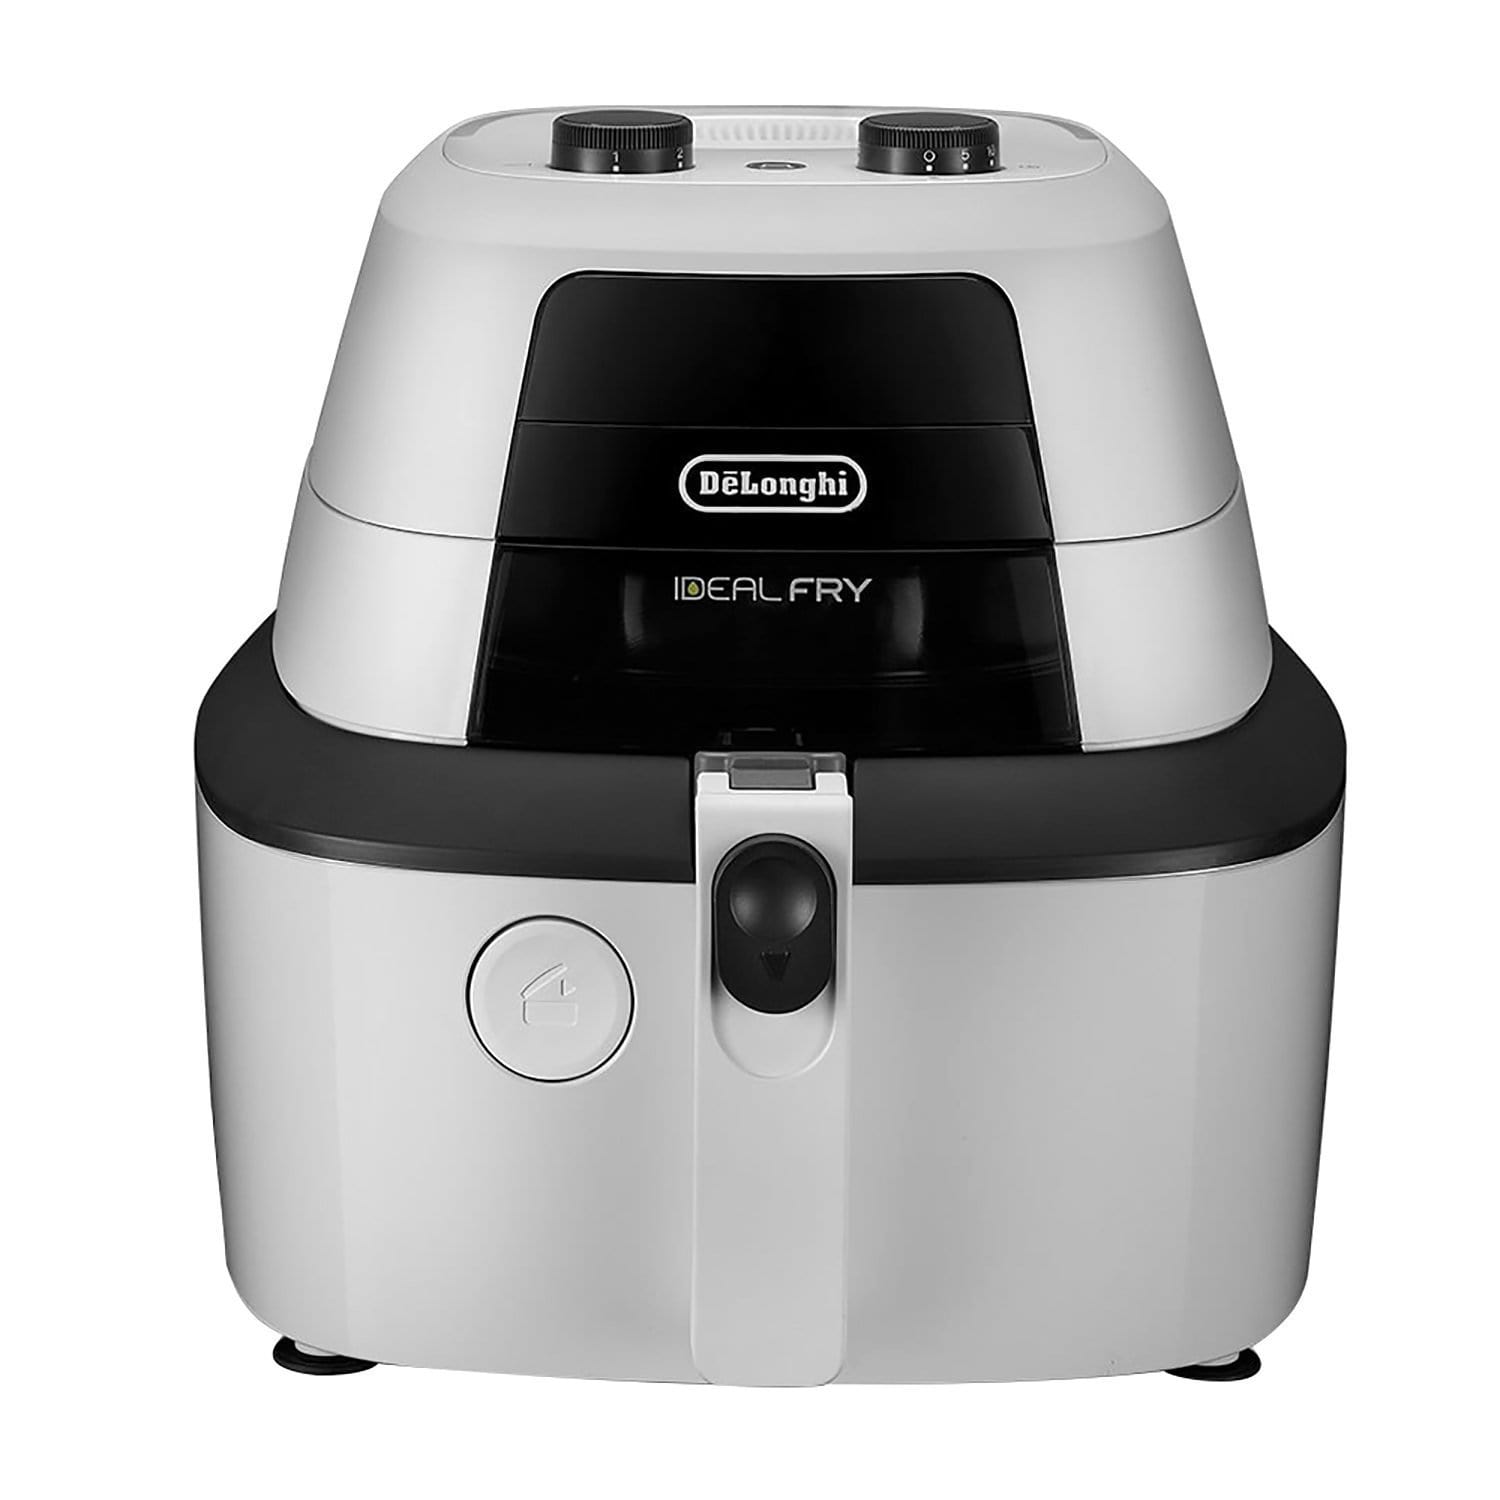 De'Longhi Ideal Fry Cooker White and Black - FH2133.W - Jashanmal Home